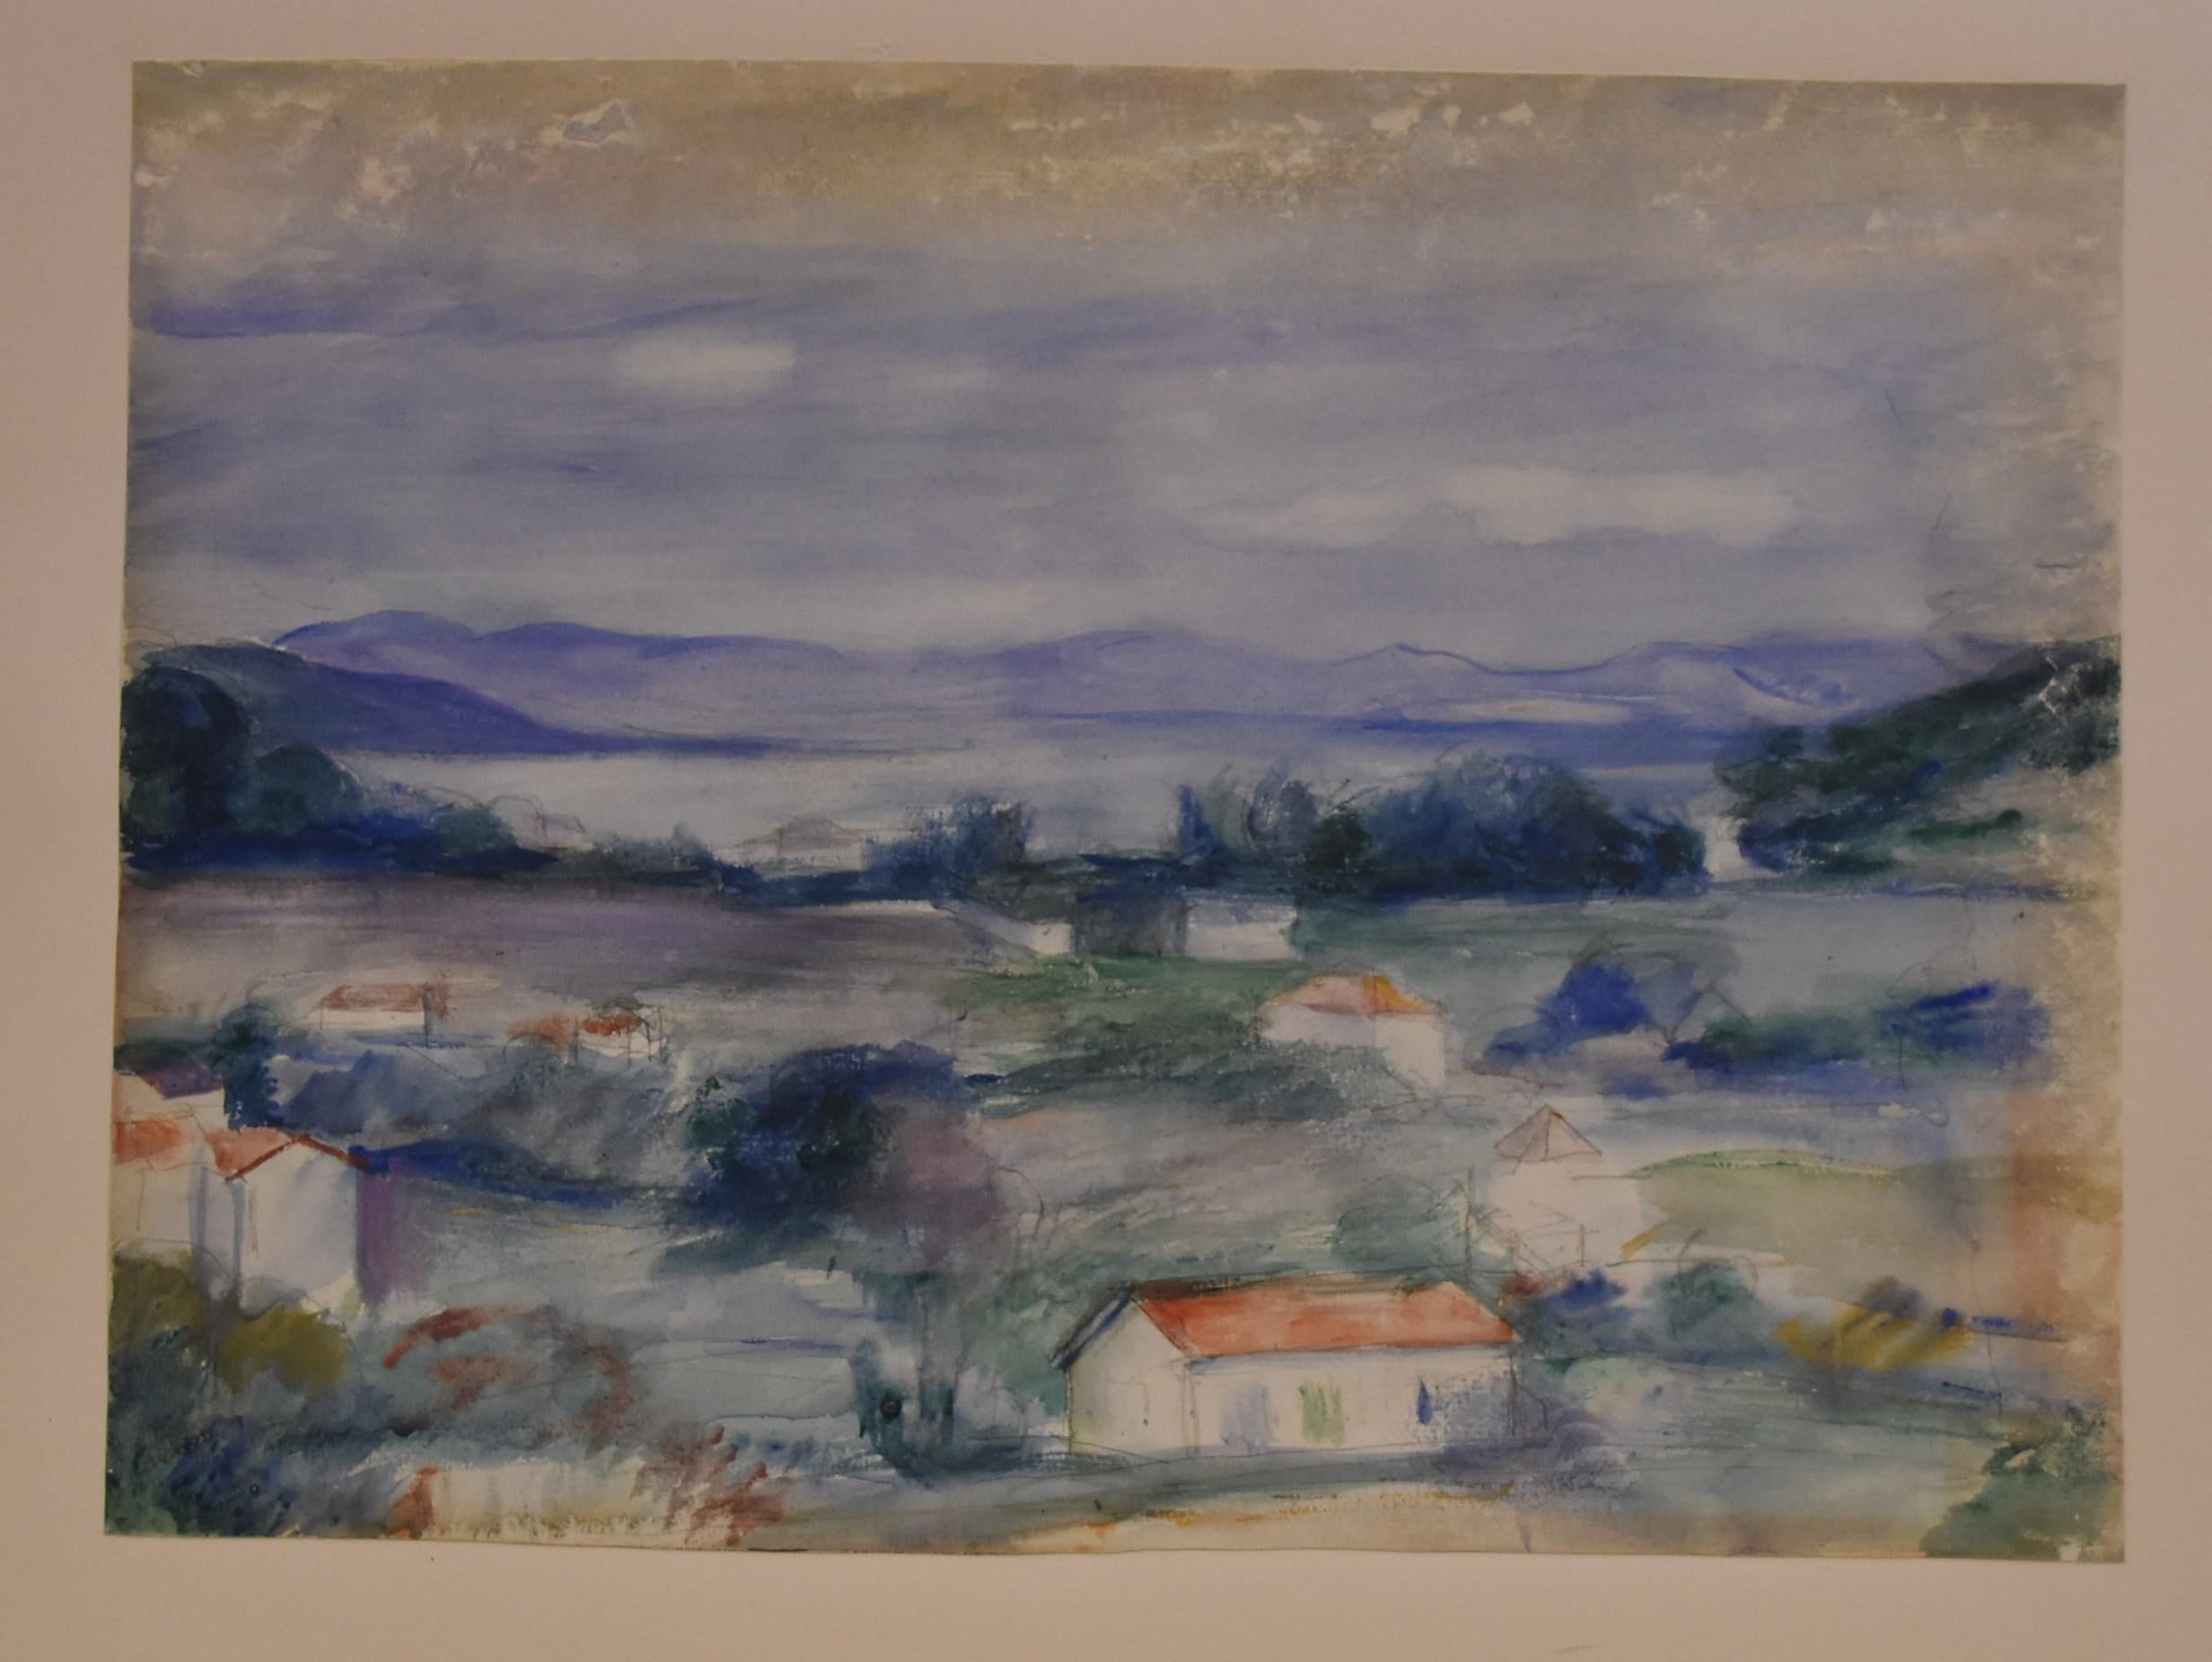 Attributed to Henri Ottmann (1877-1927) 
A Provence landscape, 
watercolor on paper
24 x 32 cm (view)
In a modern frame  : 45 x 55.5 cm

When unframed it appears the work is larger (see the third photograph please). It's in fact cropped by the